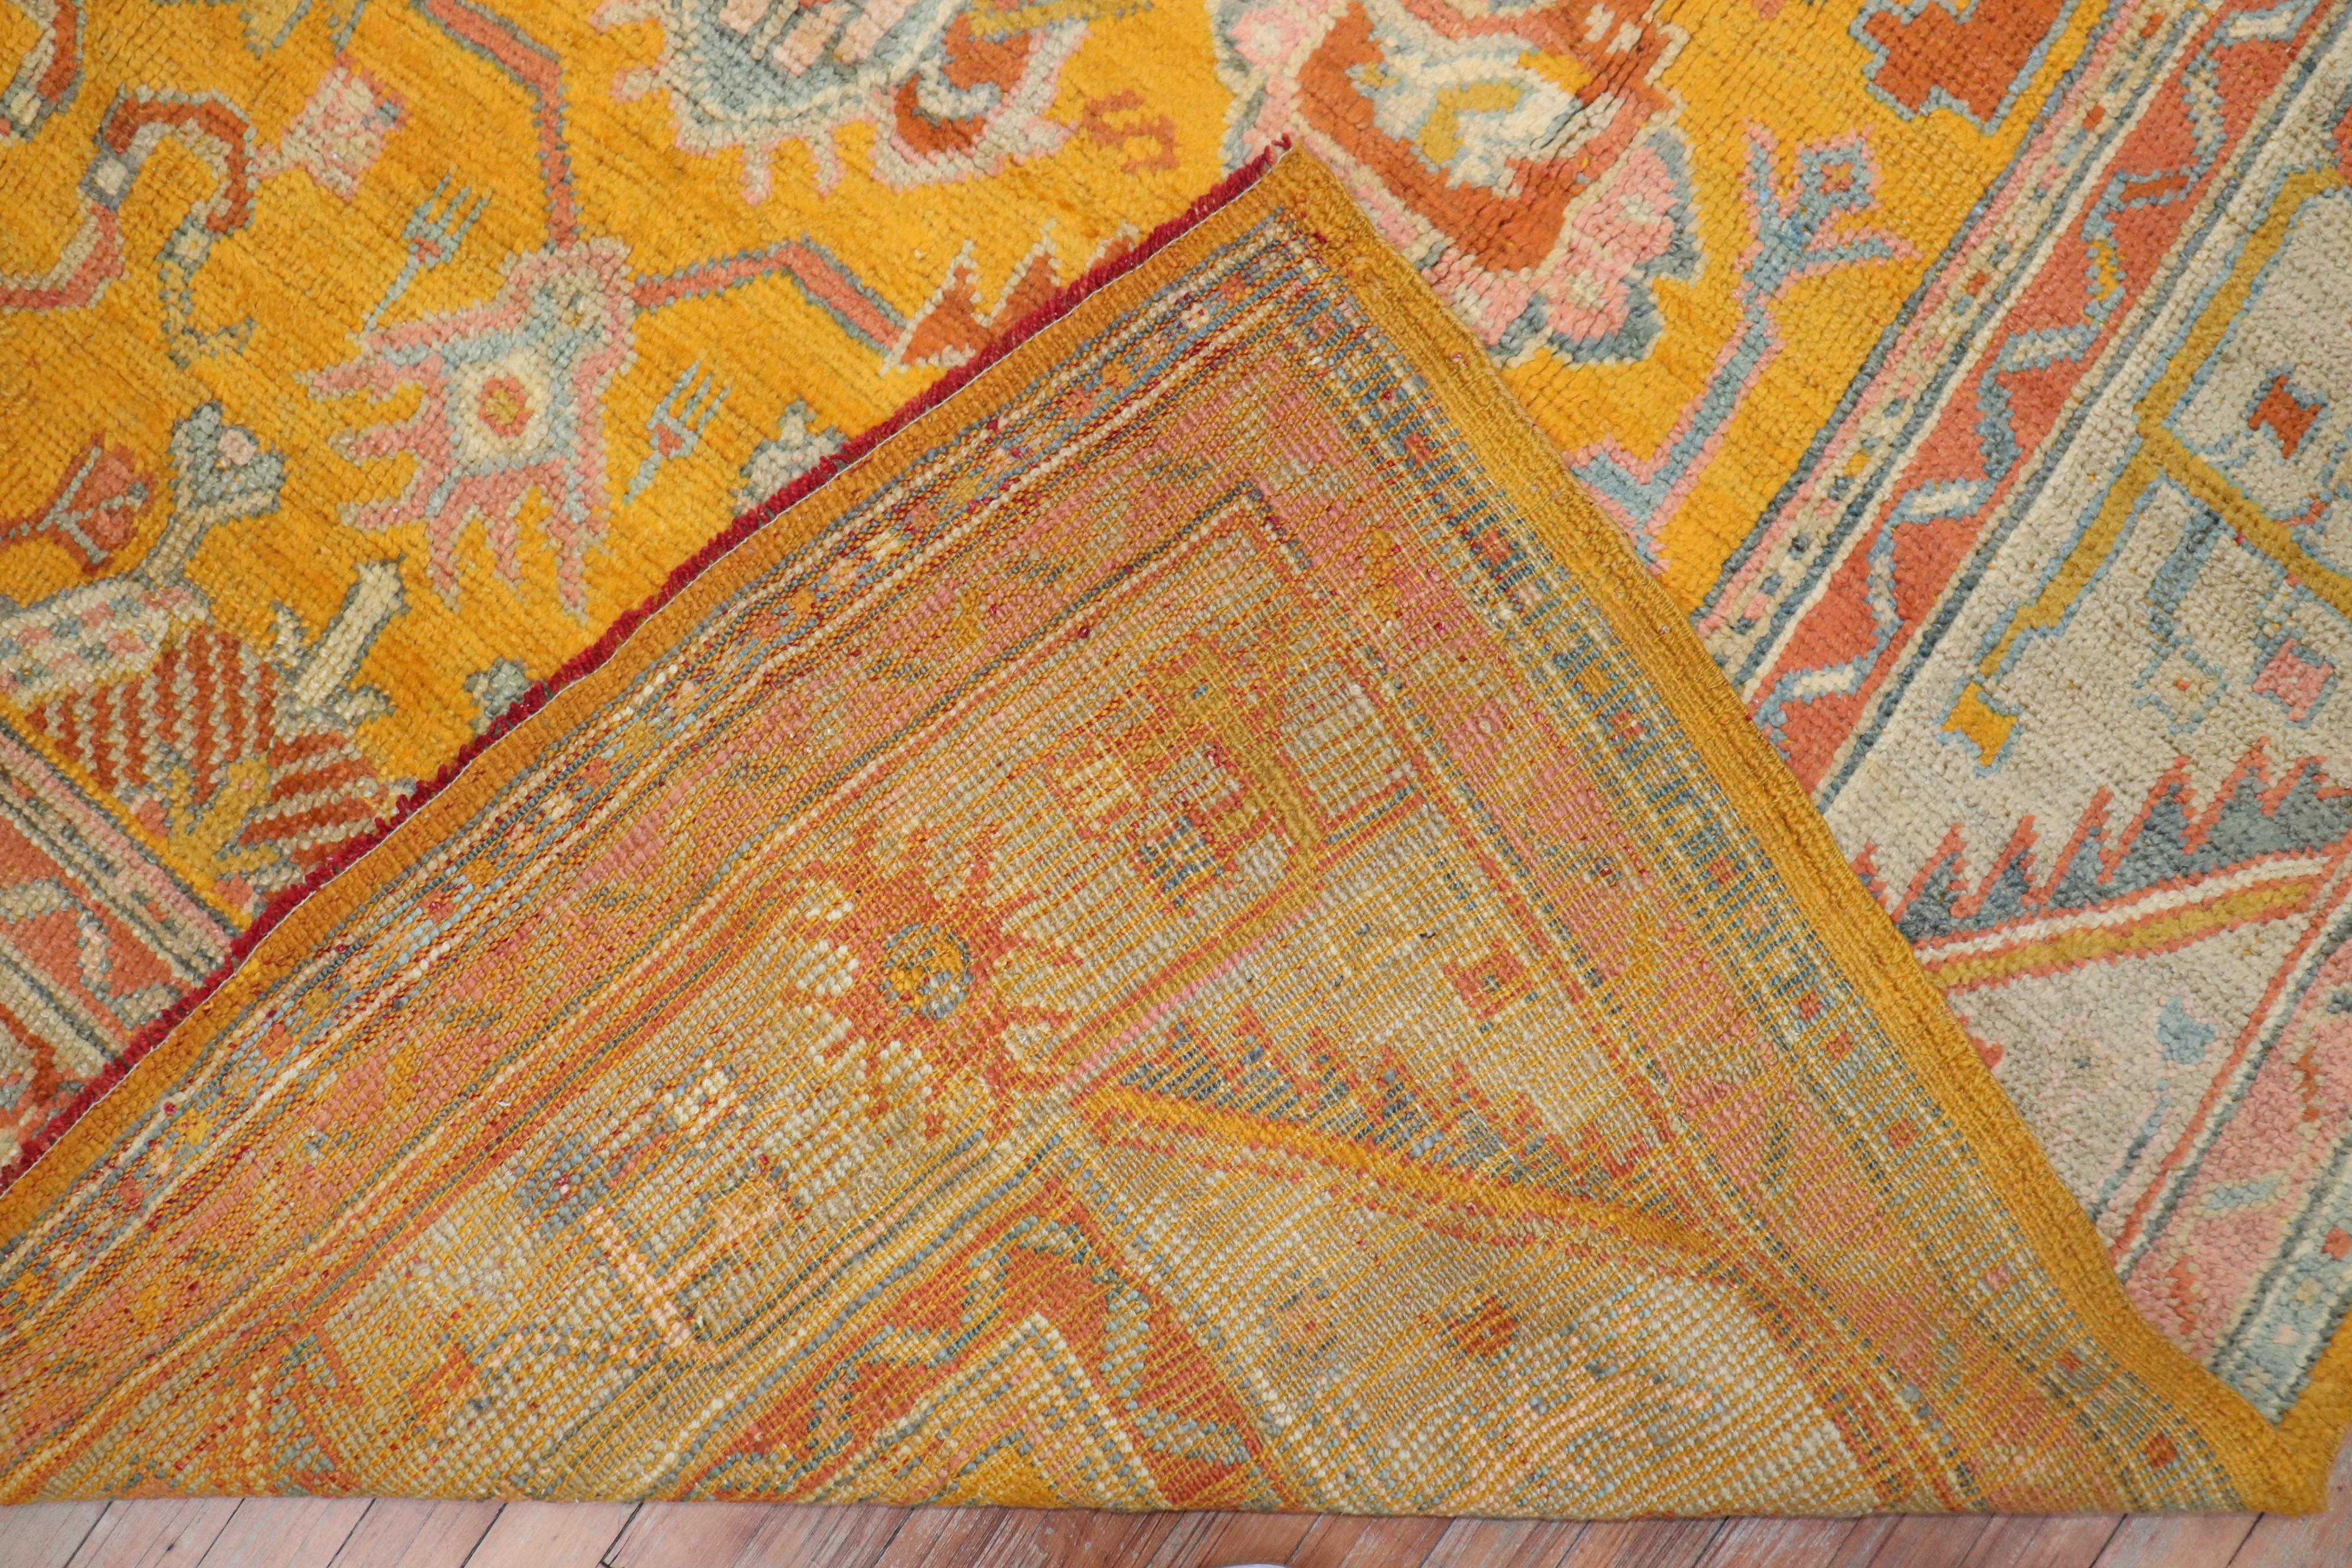 Stunning early 20th-century golden rod mango color antique Turkish Oushak rug in excellent condition

Measures: 7'1